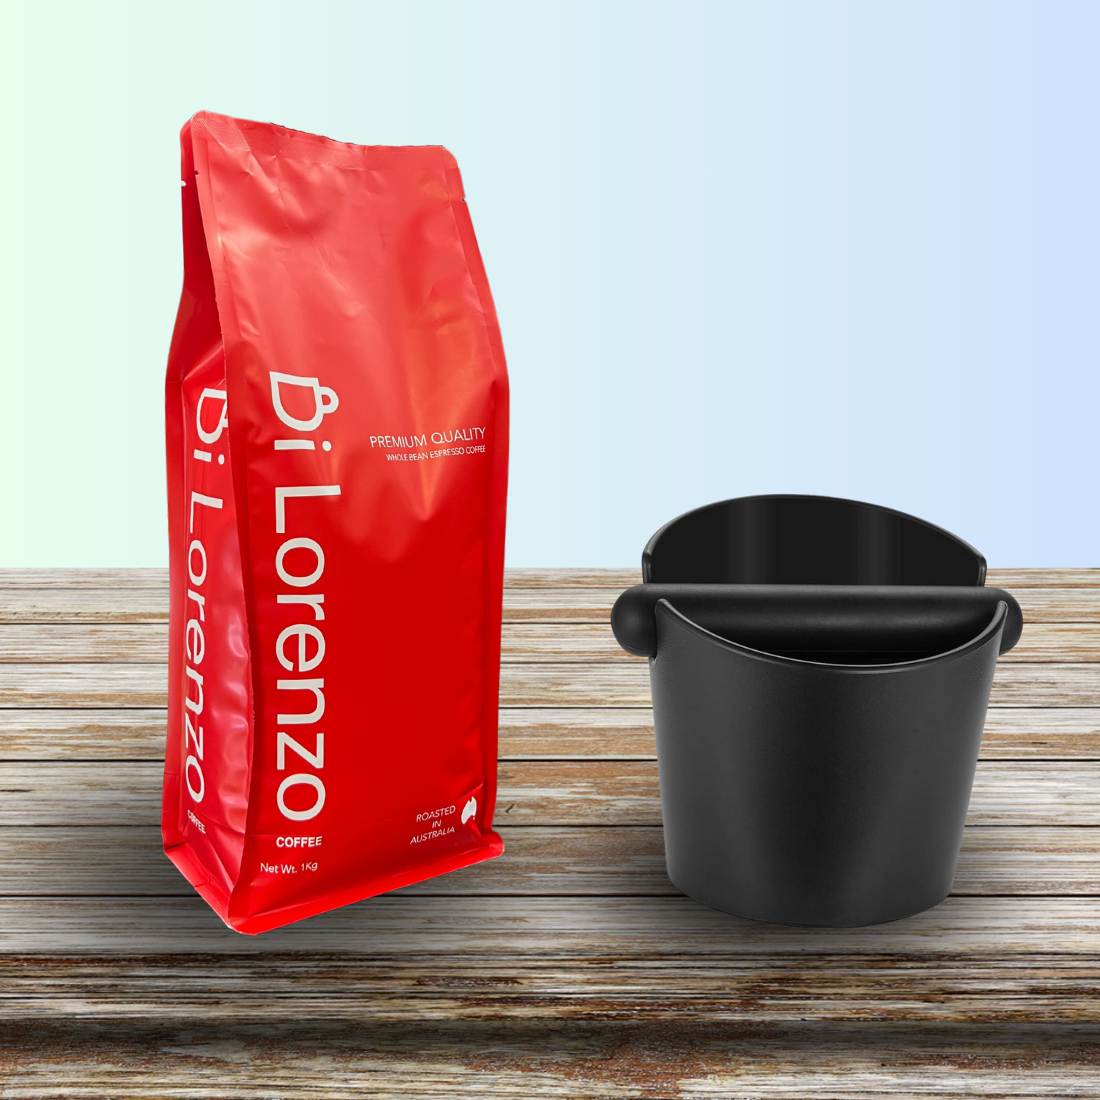 Premium quality Di Lorenzo Coffee beans in a red package on a wooden surface next to a black knock box, for Di Lorenzo's official website, emphasizing fresh roasted coffee from Australia